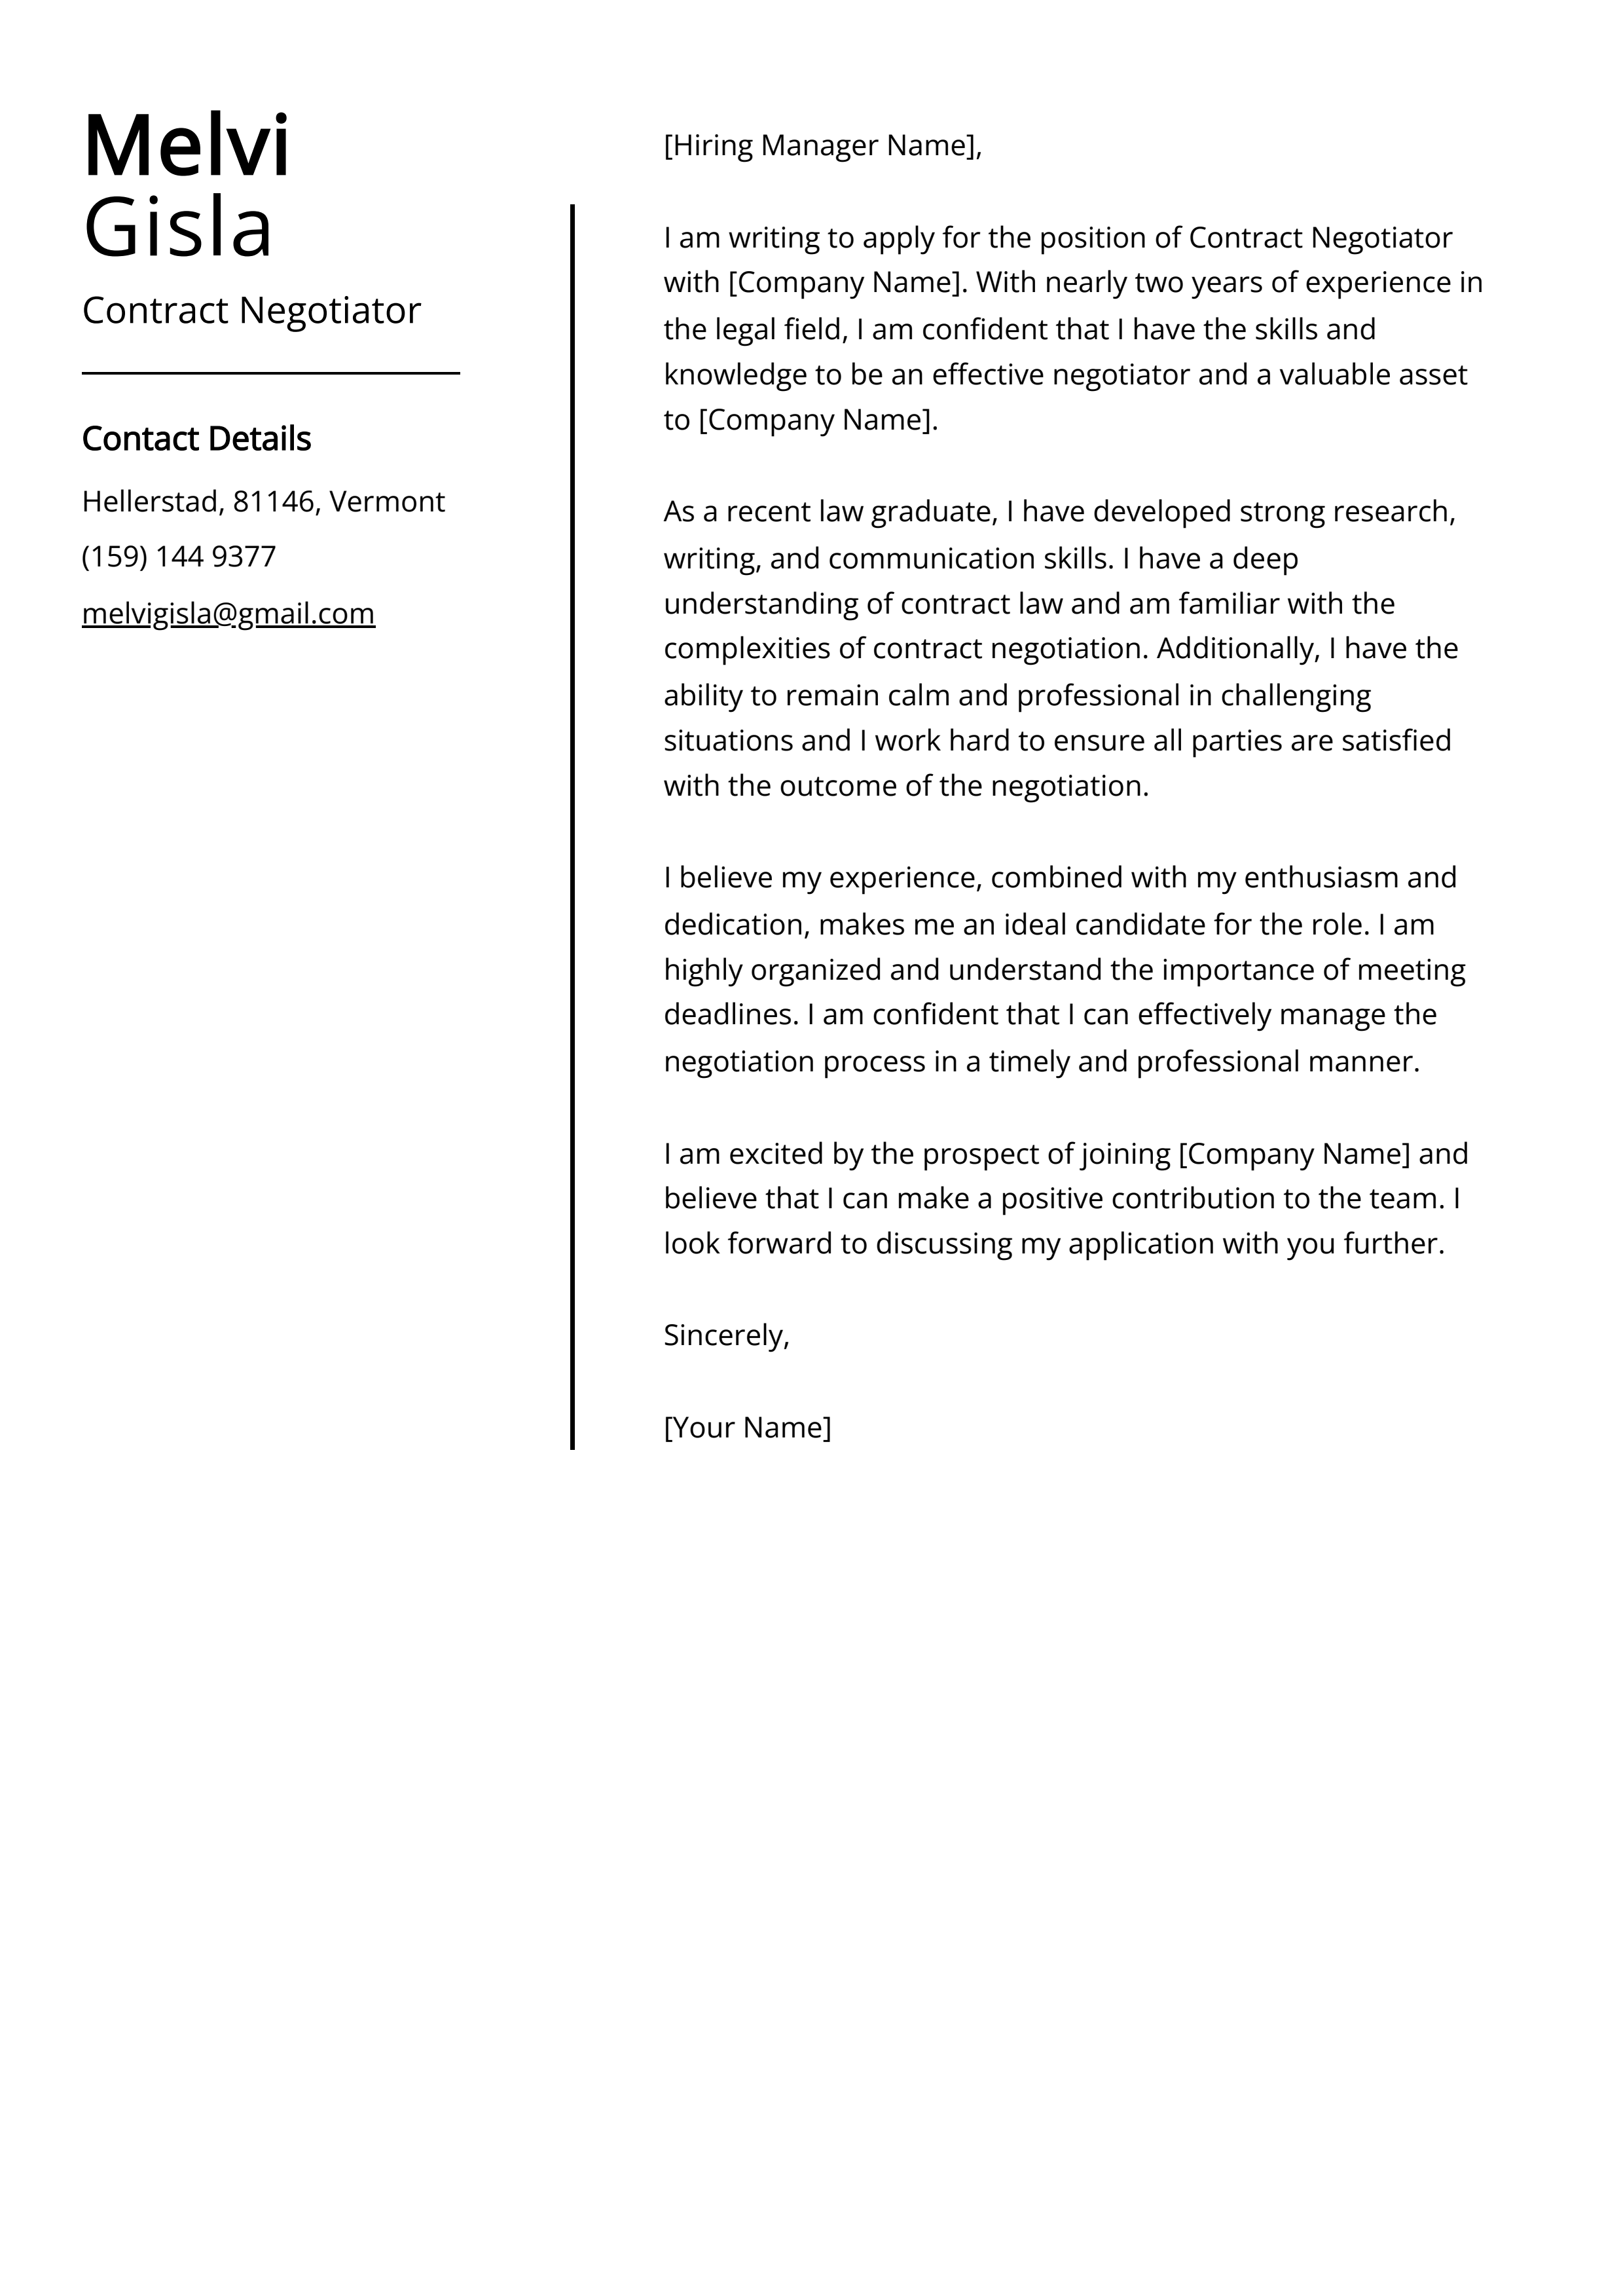 Contract Negotiator Cover Letter Example